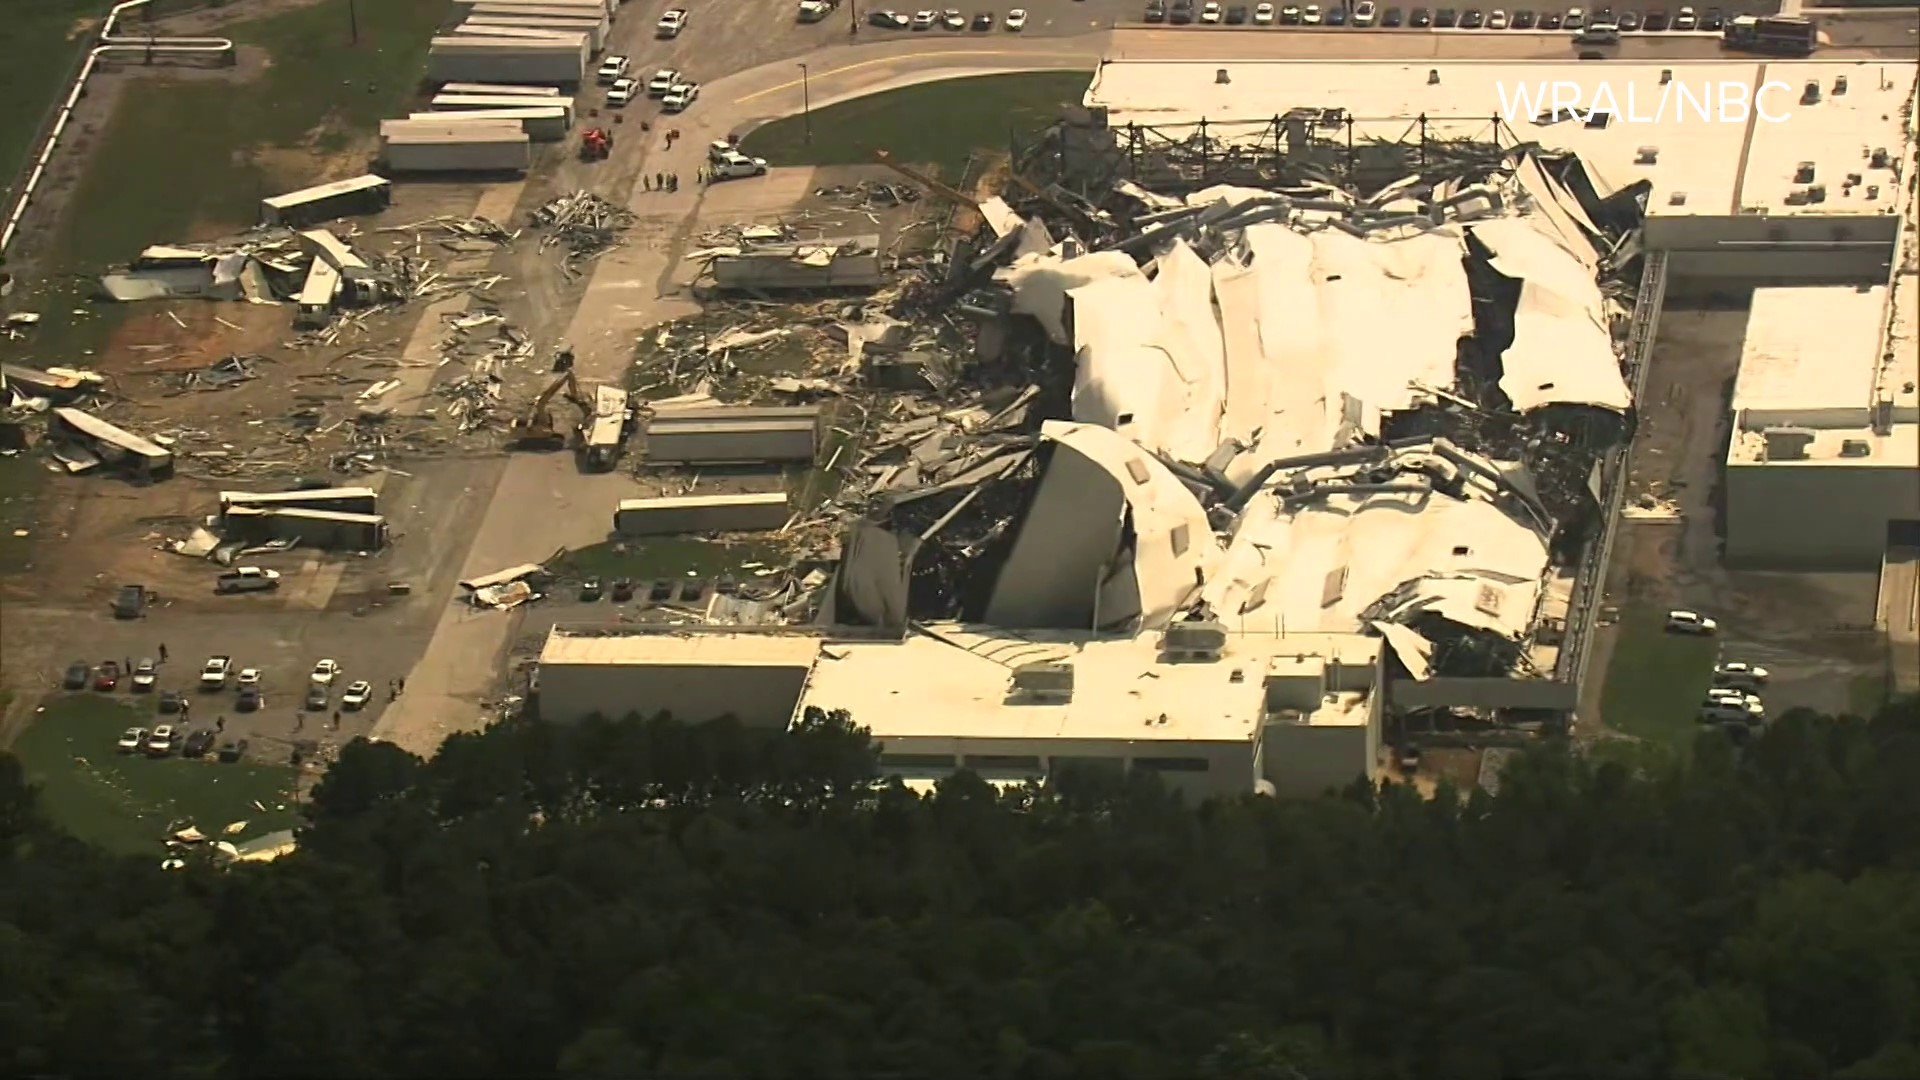 The roof was ripped off the Pfizer building in Rocky Mount, North Carolina, by a tornado that caused significant damage Wednesday afternoon.